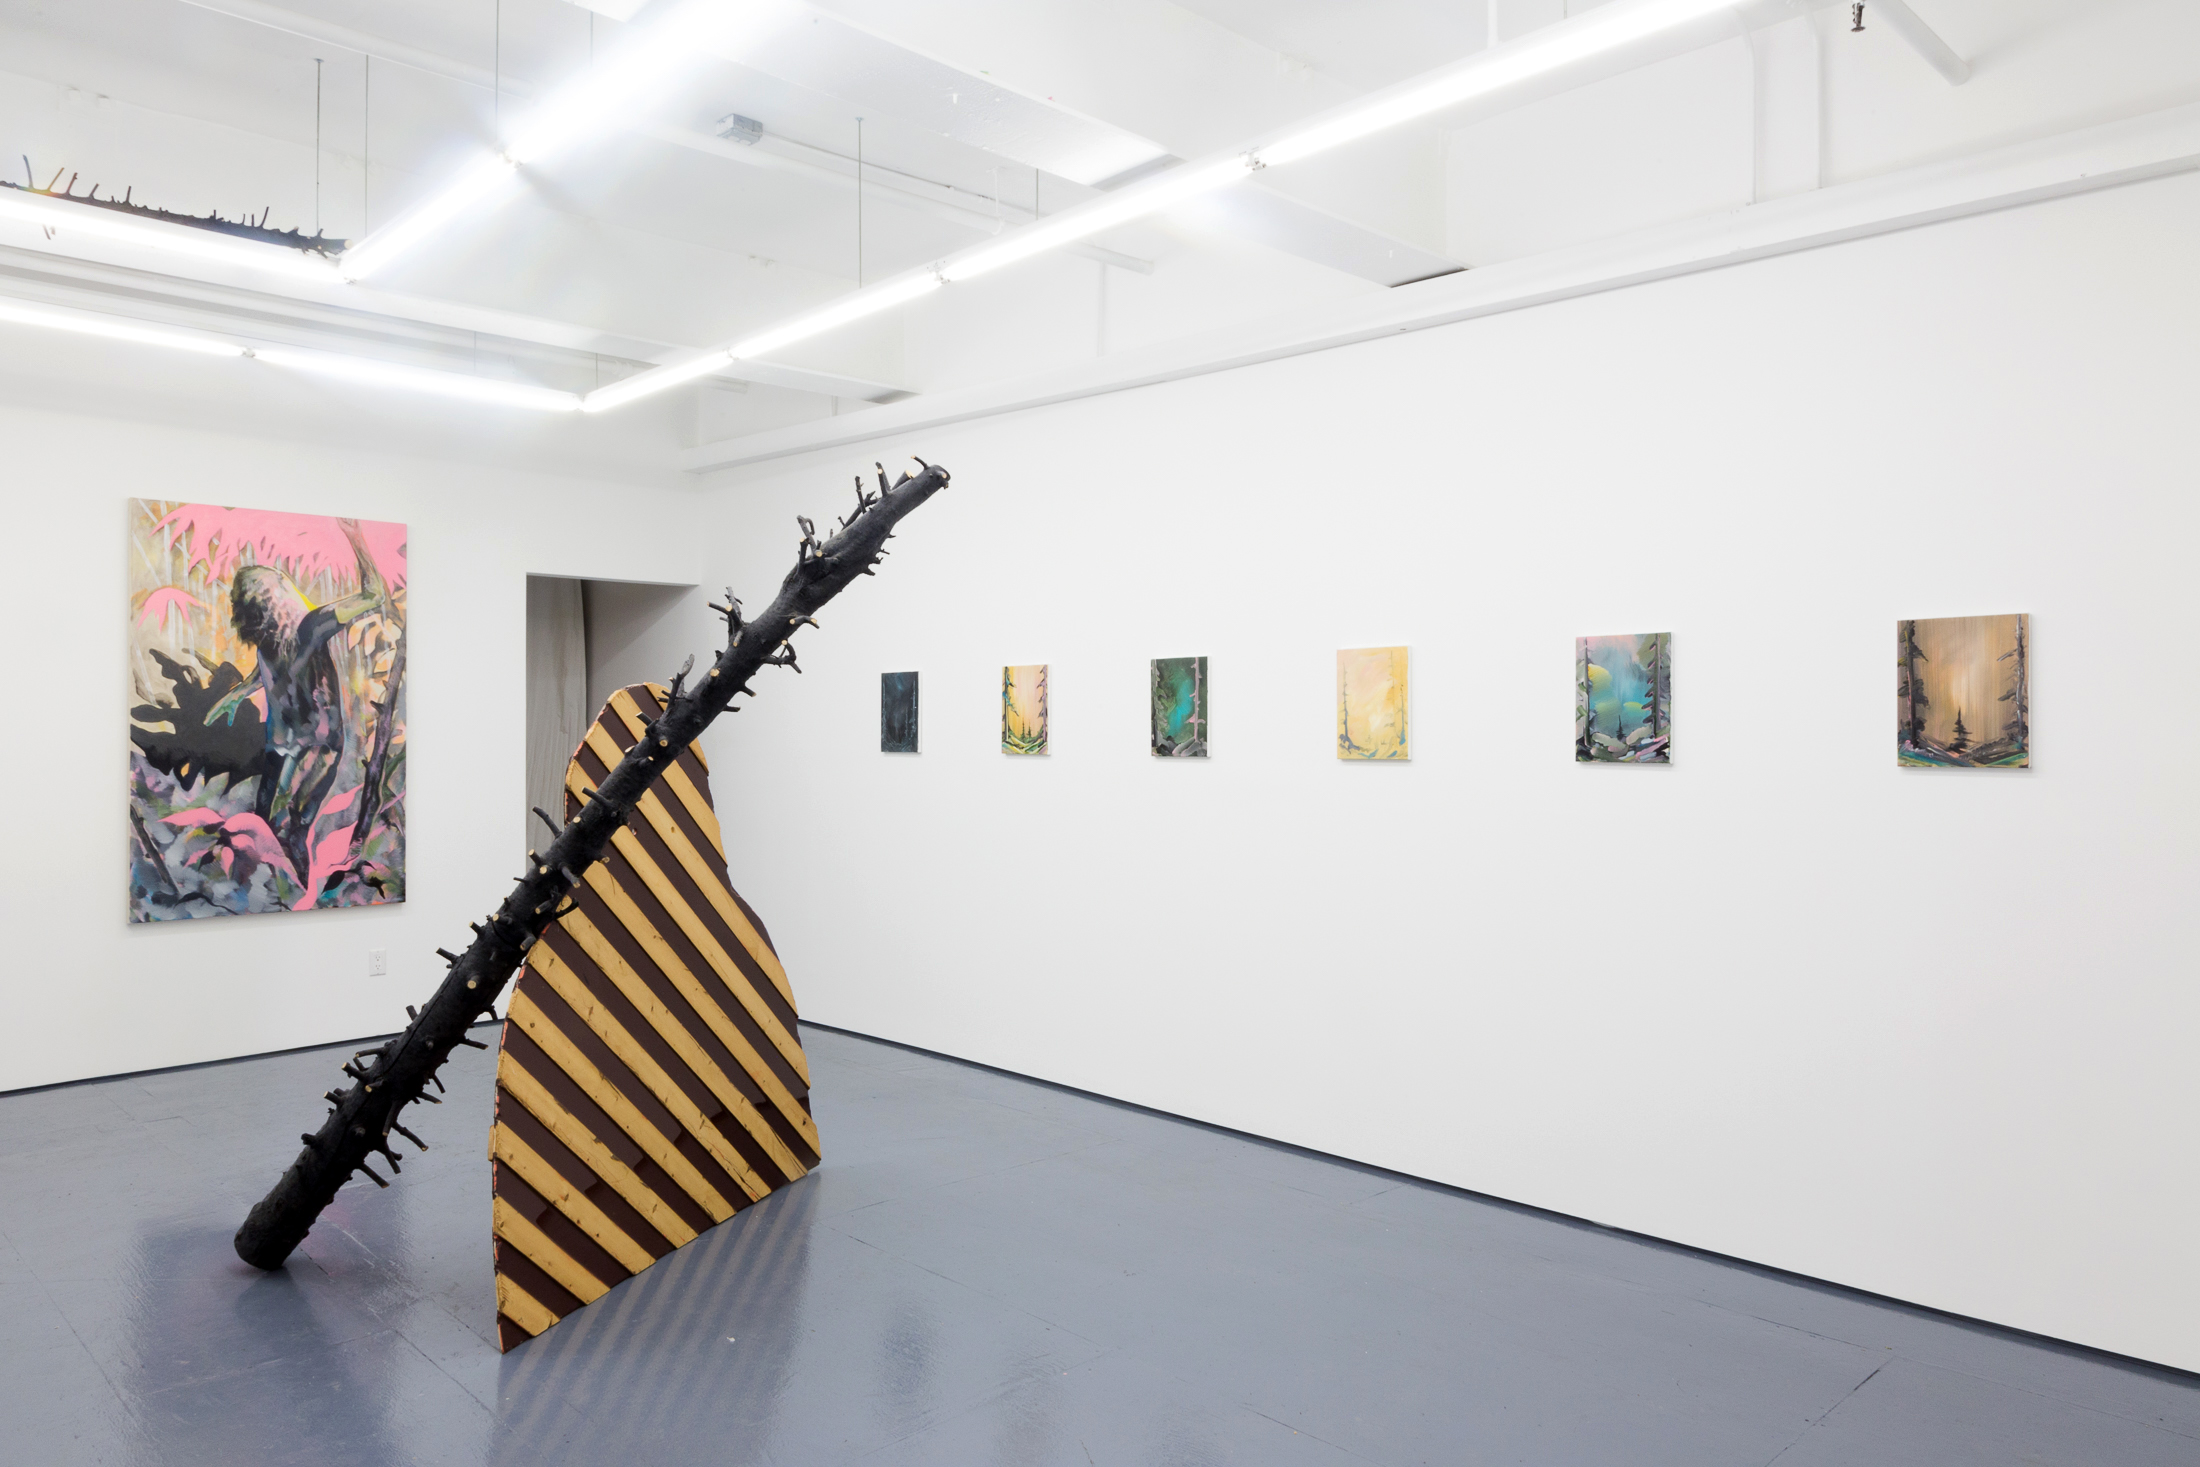  Installation view of the exhibition Run for Your Life by Guy Nelson at Transmitter 